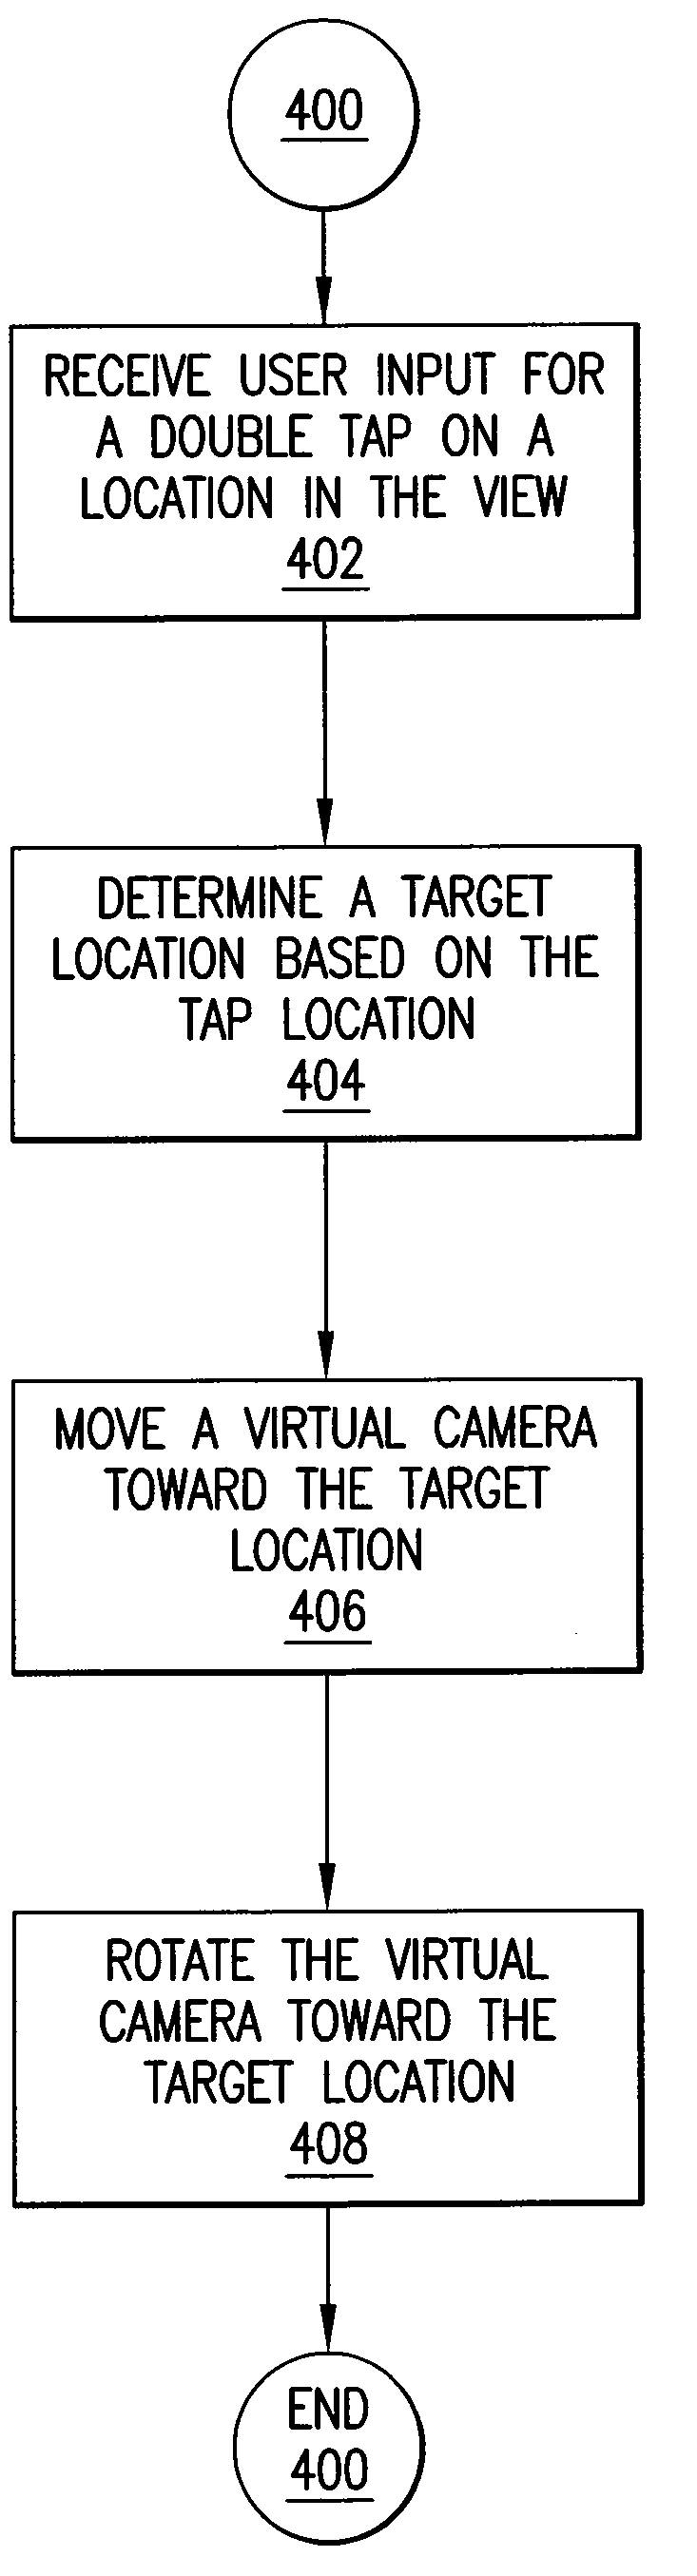 User Interface Gestures For Moving a Virtual Camera On A Mobile Device